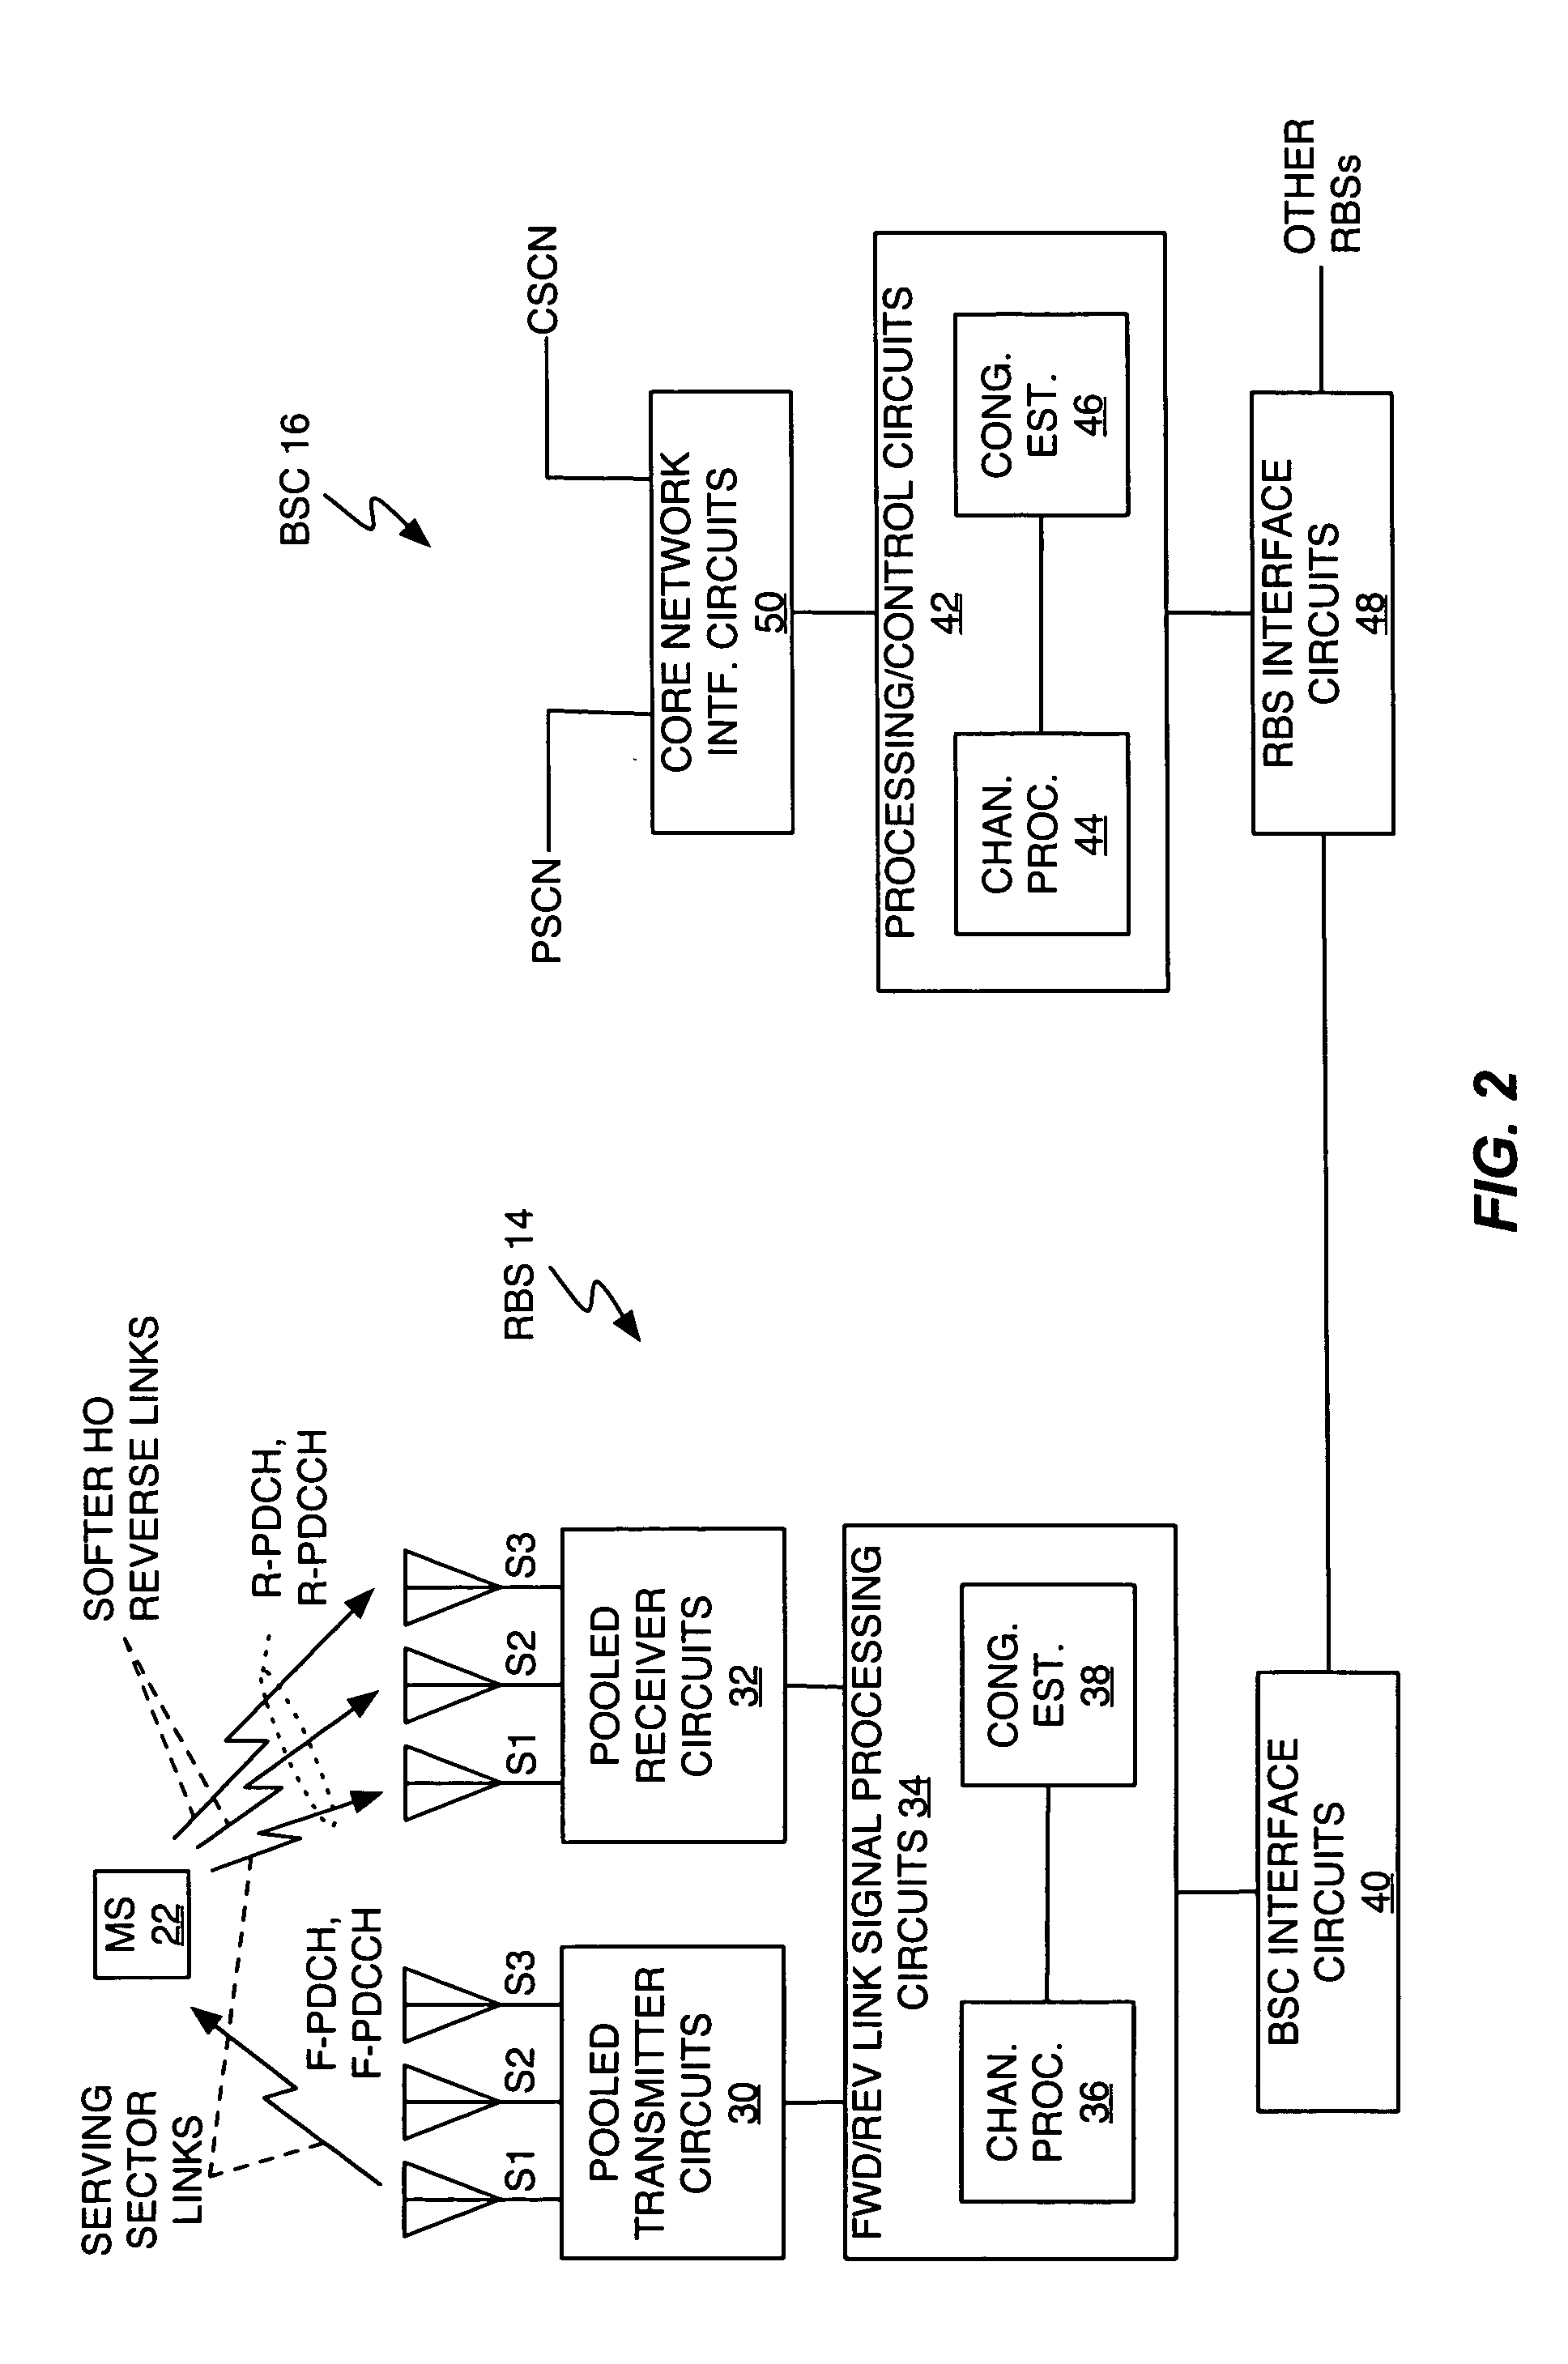 Method and apparatus for congestion control in high speed wireless packet data networks